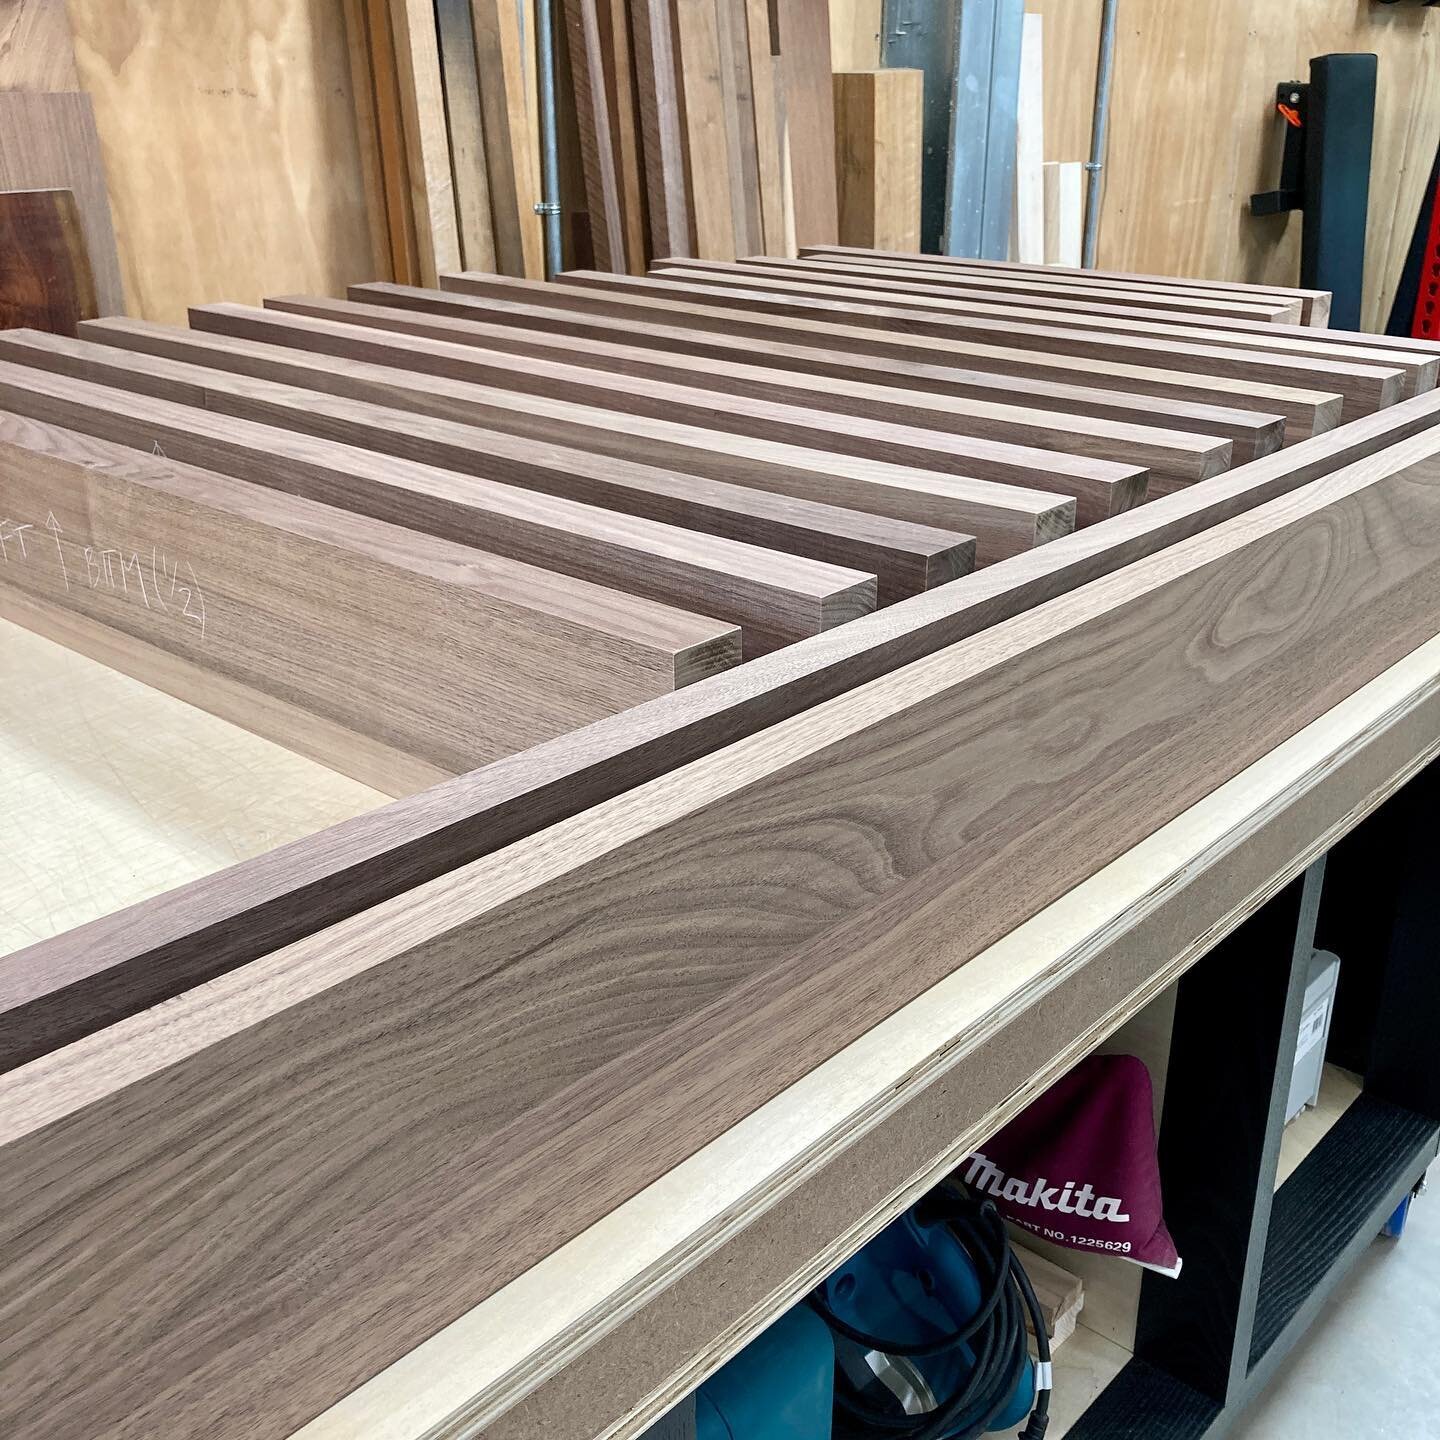 All the dimensioned frames for a very overdue bed for a very good friend. A manufacturer of doors for yachts was throwing away this walnut. It&rsquo;s gorgeous, and I haven&rsquo;t even sanded it yet. We live in strange times.

.
.
.
#vvfurniture #bl